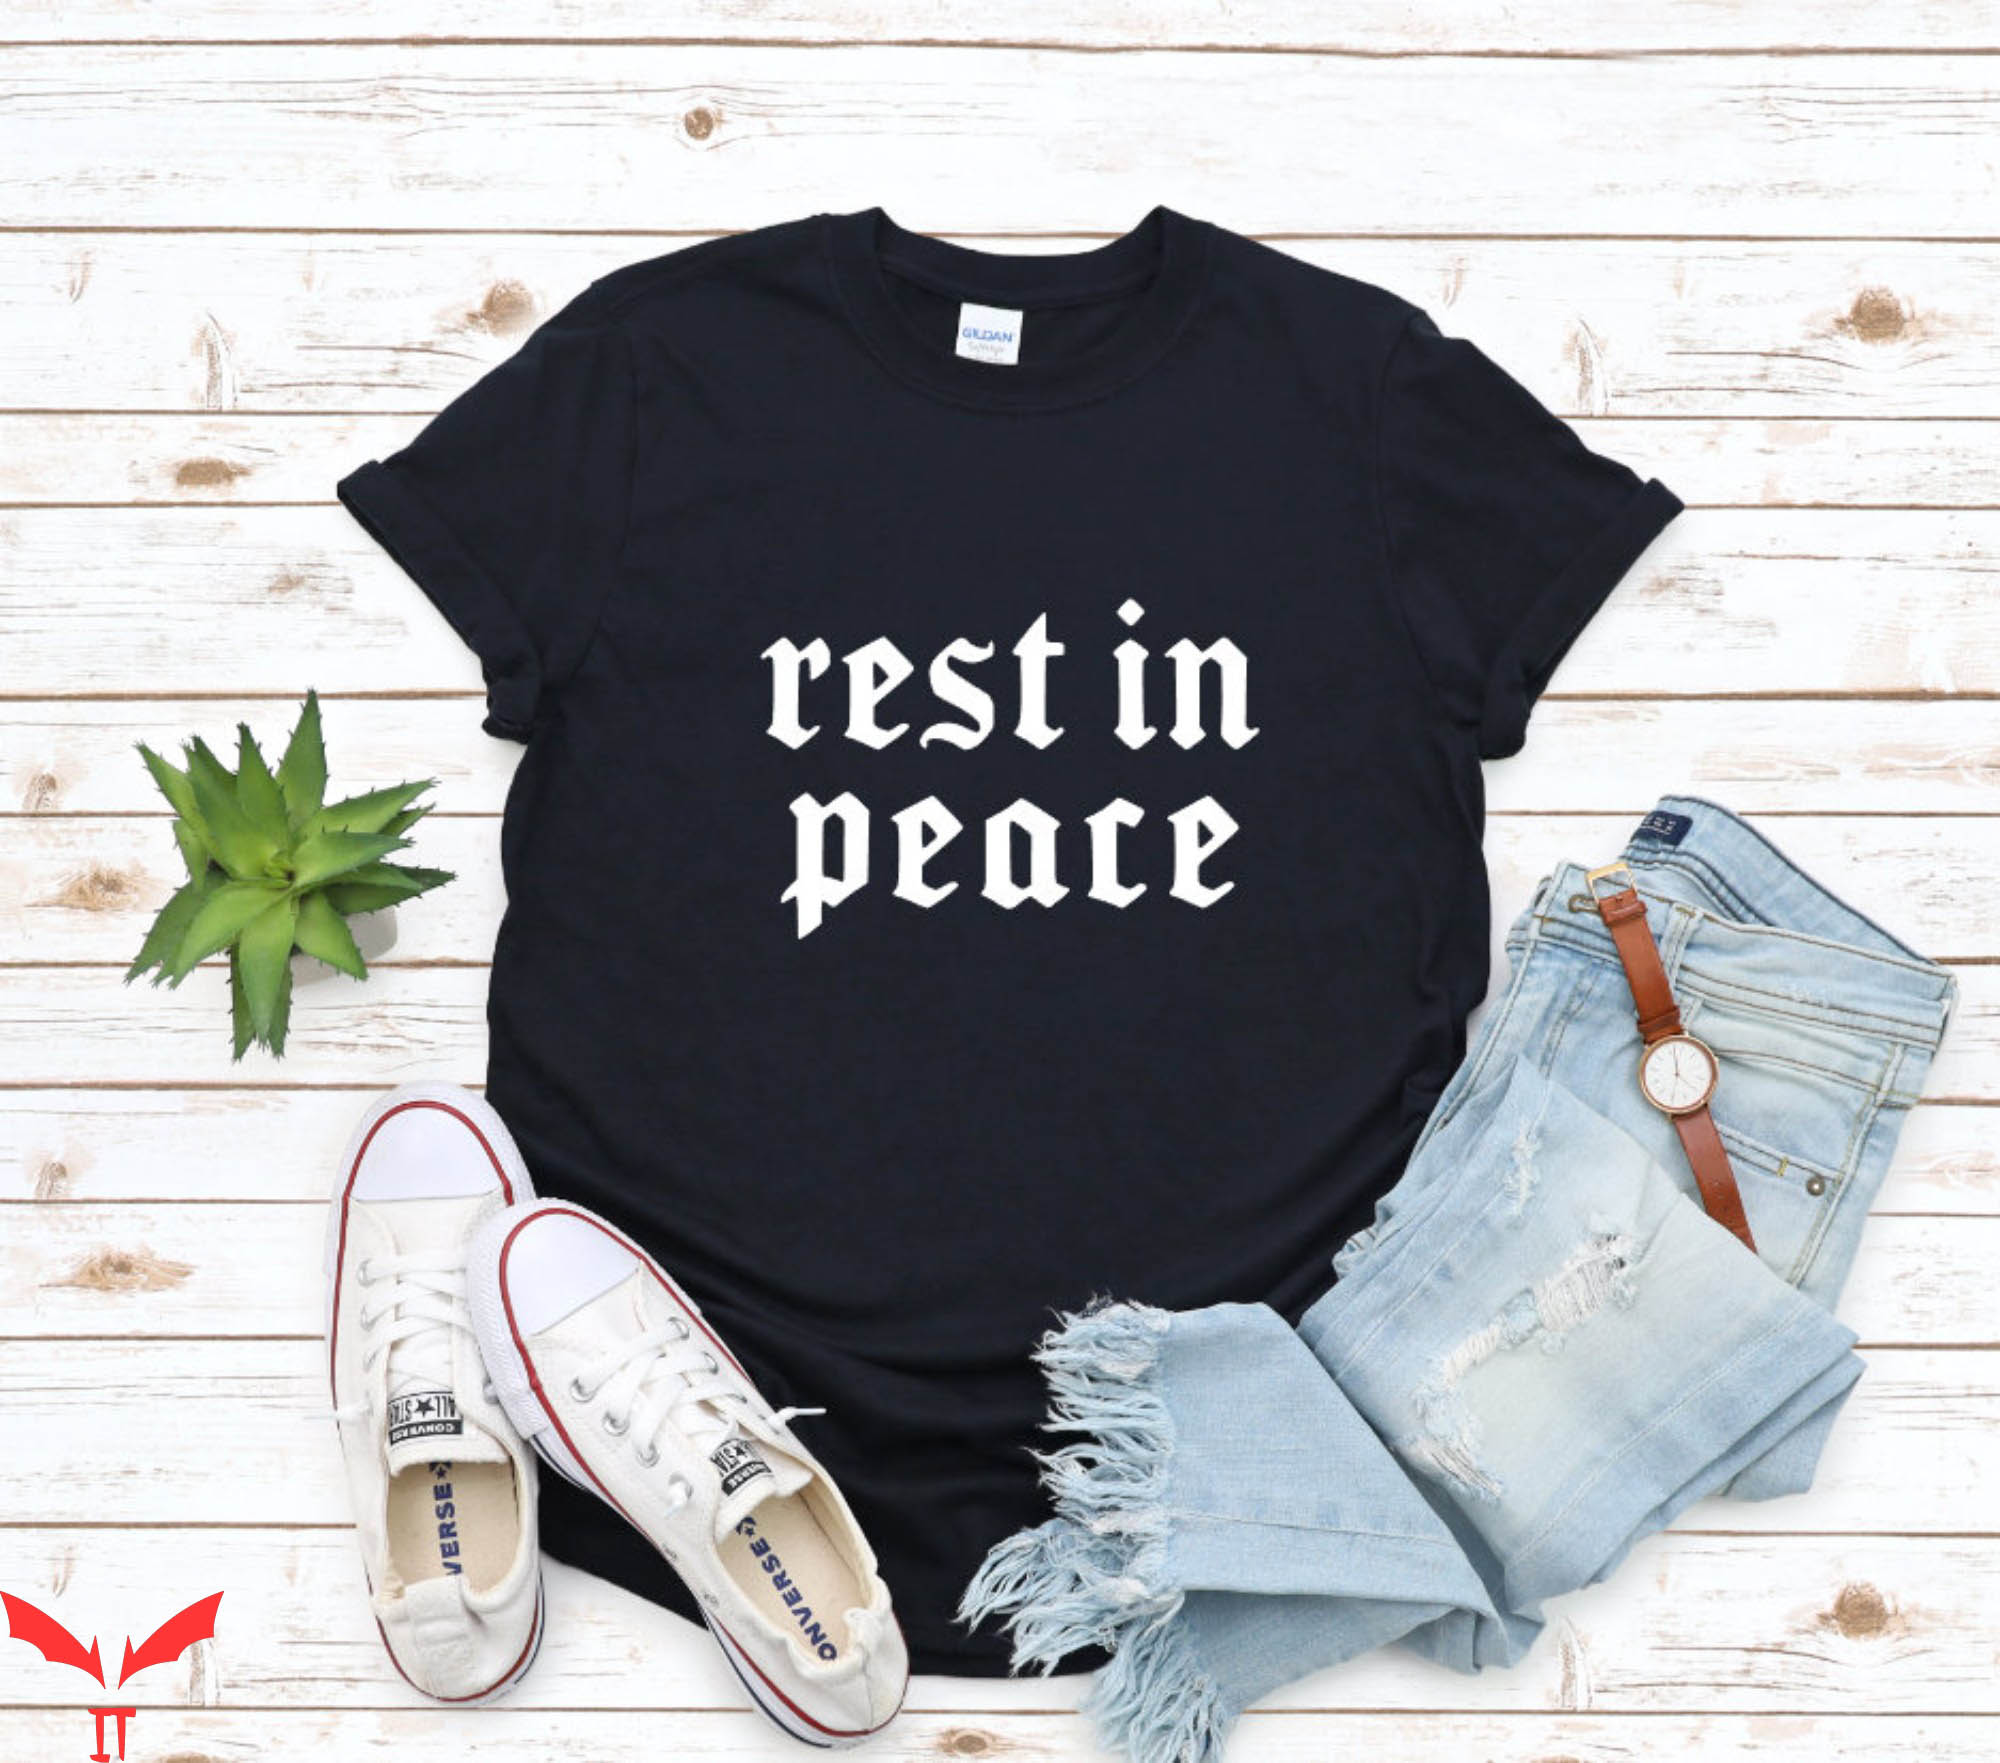 Rest In Peace T-Shirt Goth Gothic Home Decor Tee Shirt